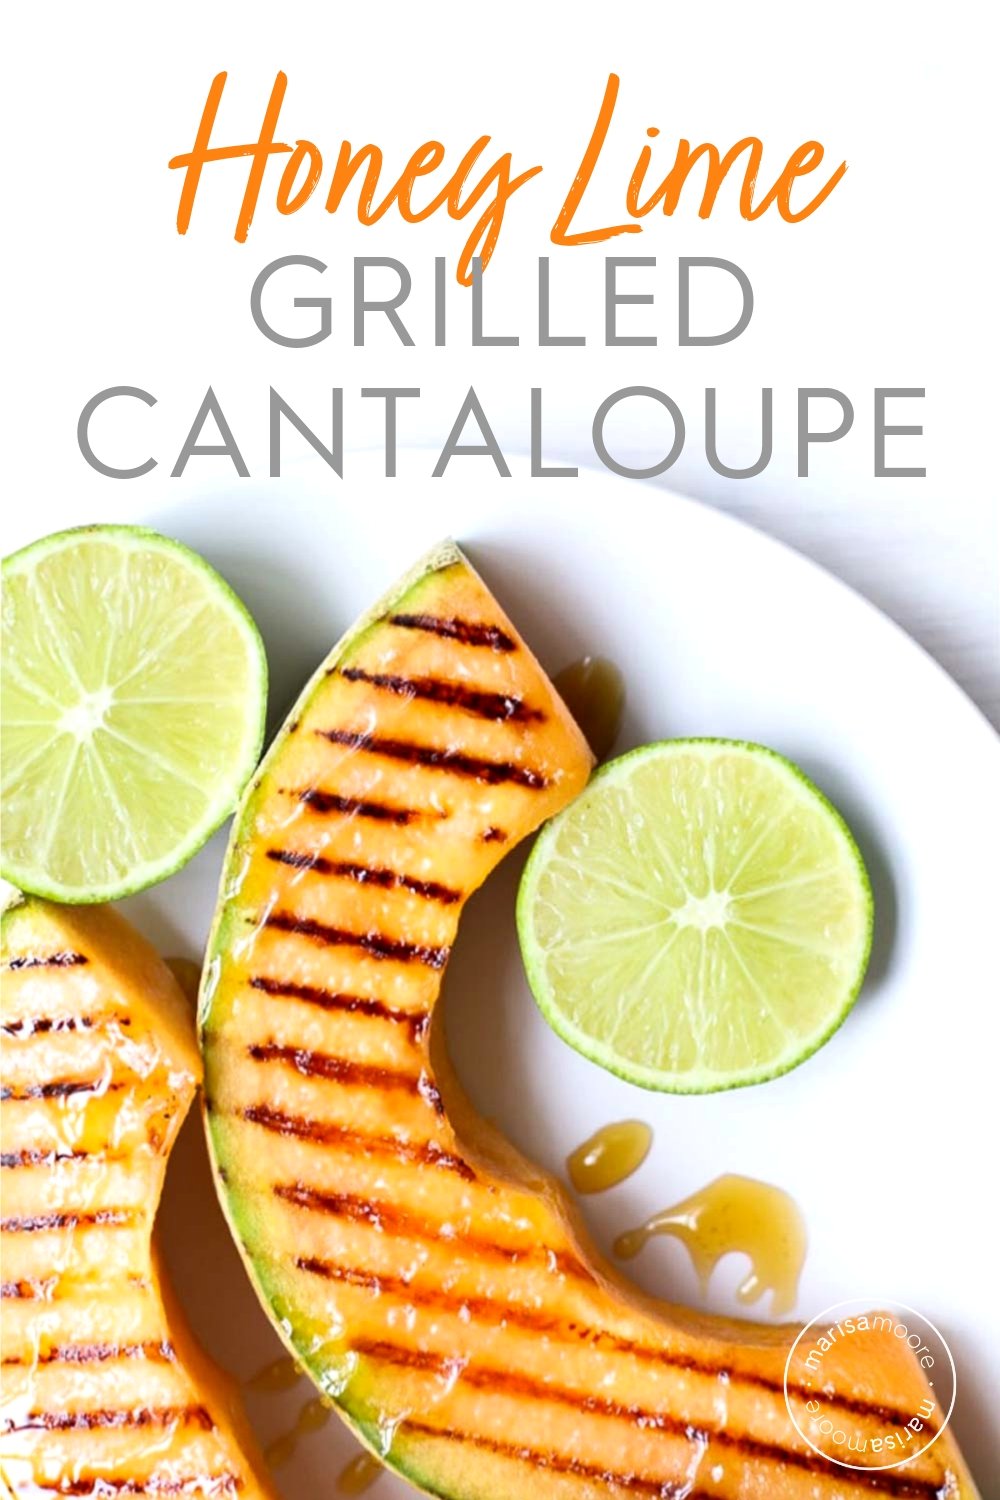 Easy Grilled Cantaloupe Recipe | Marisa Moore Nutrition